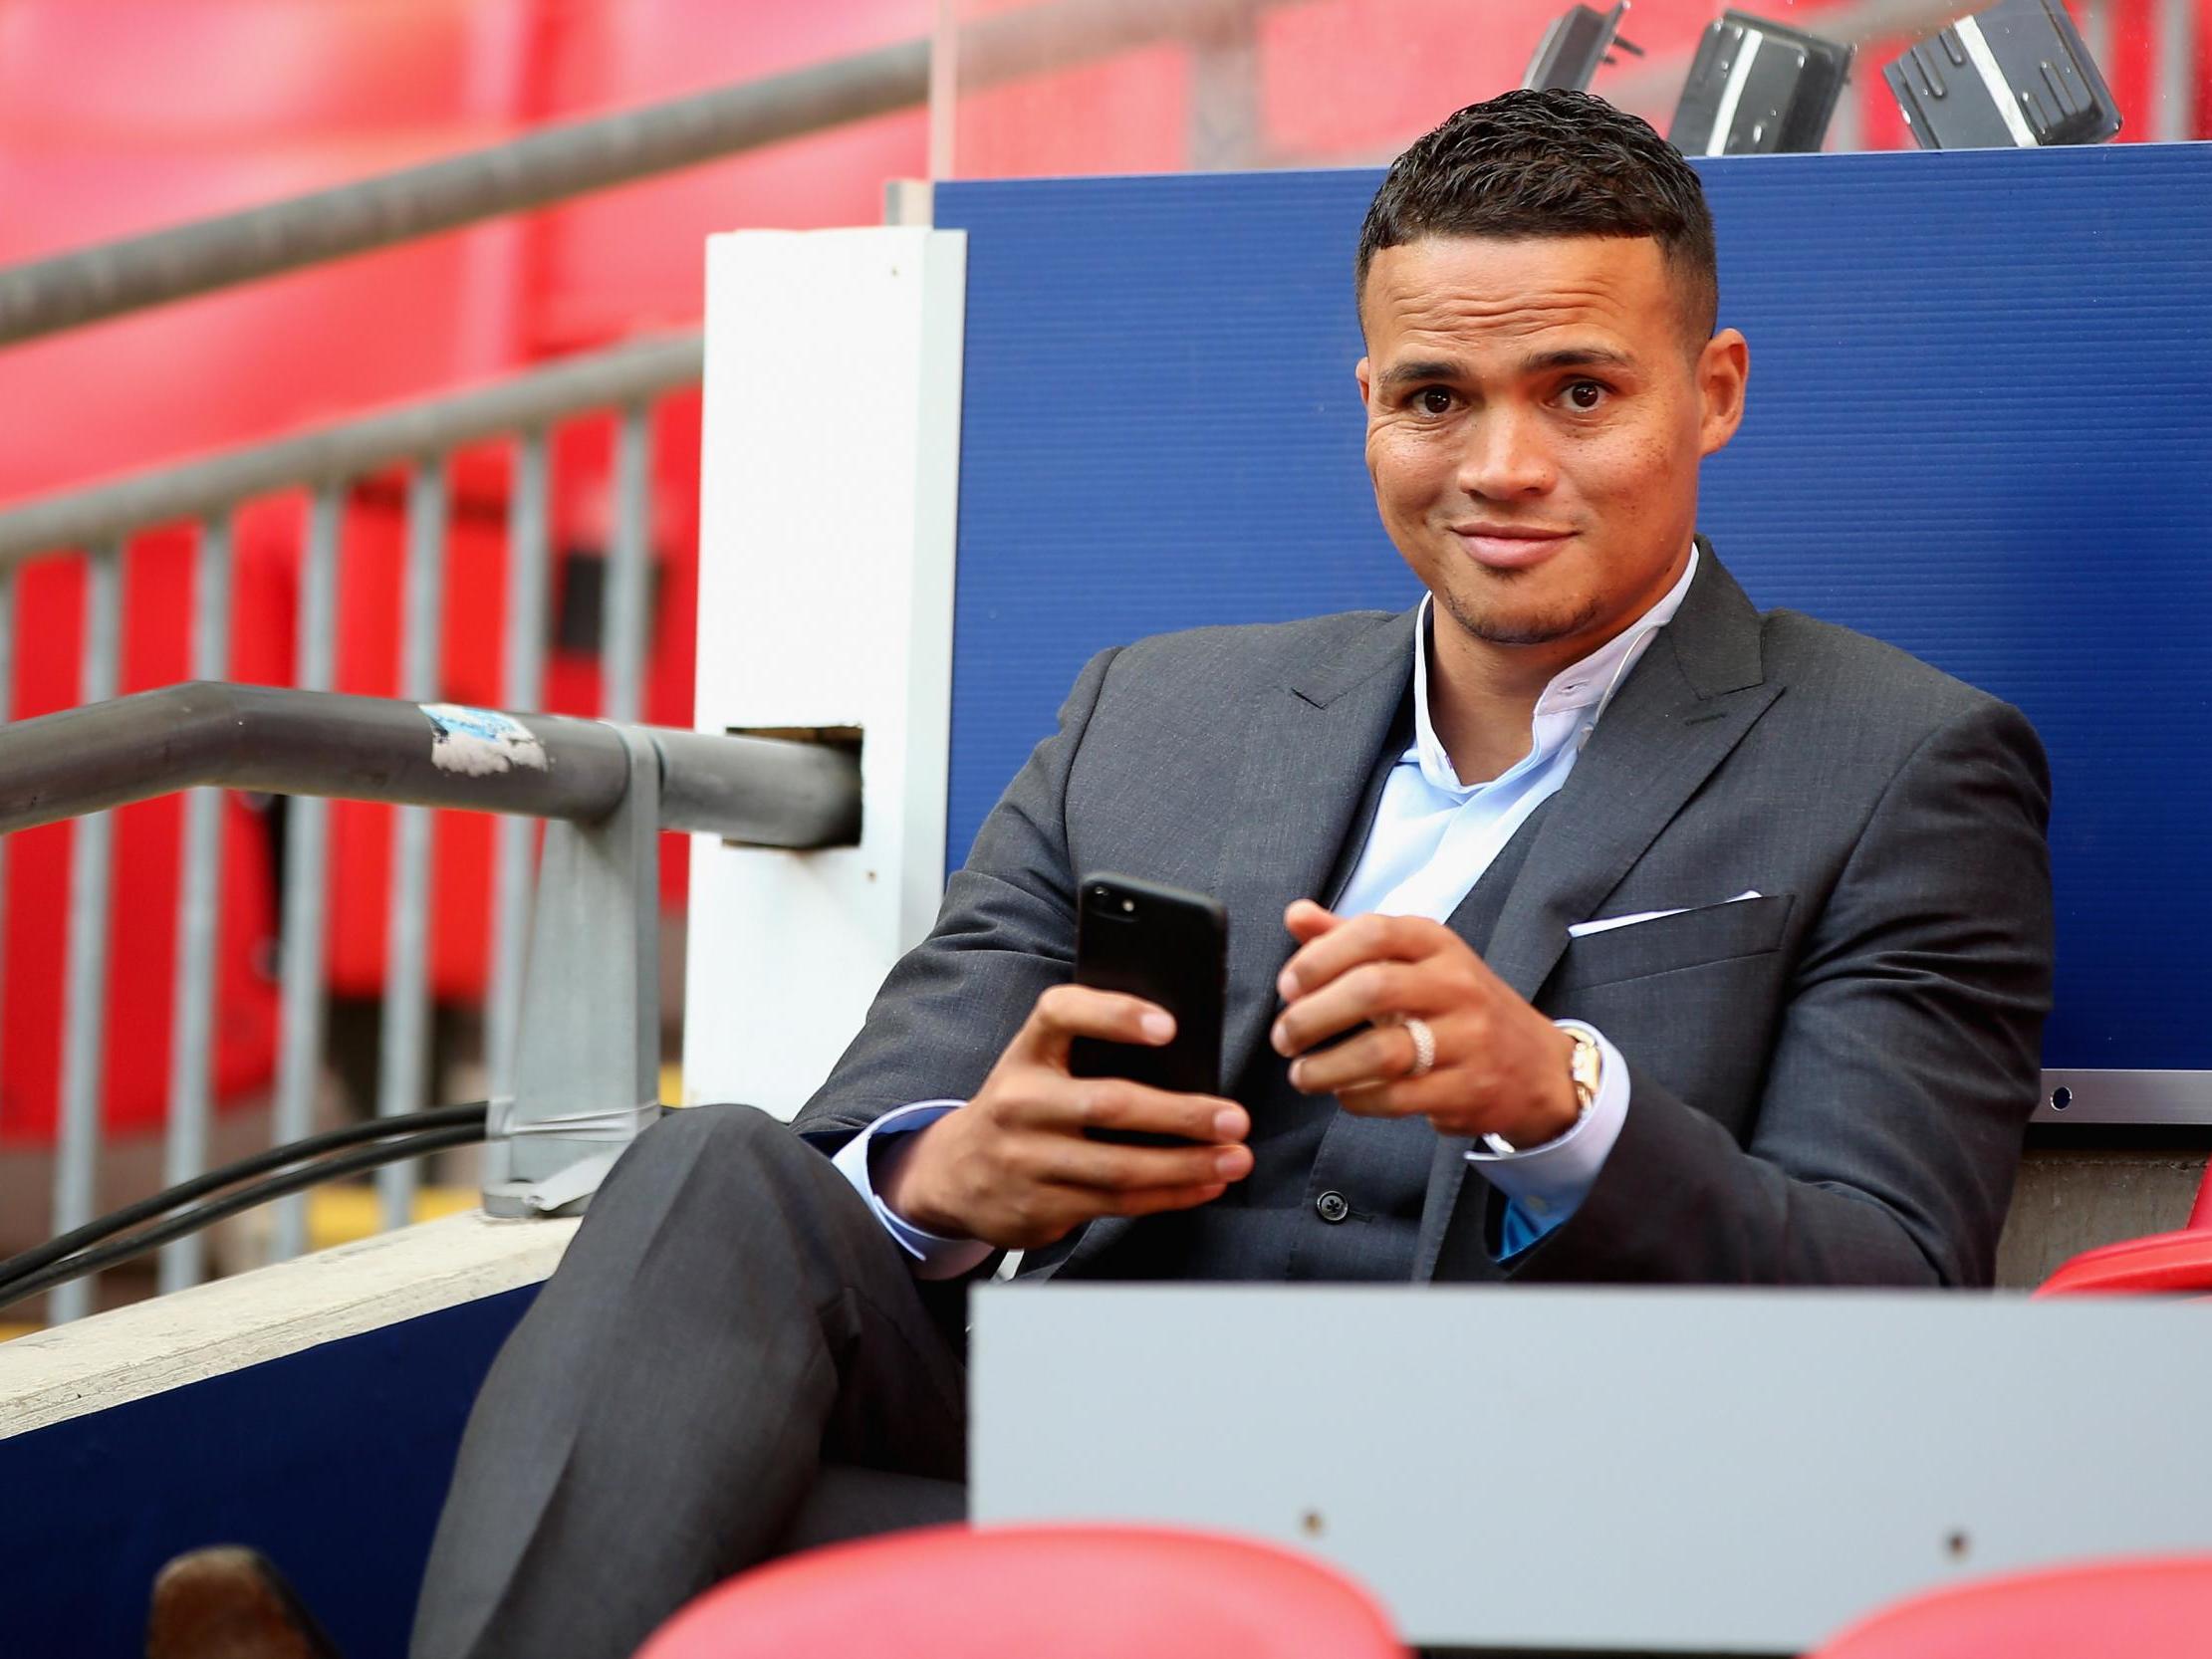 When Jermaine Jenas arrived at Tottenham from Newcastle in 2005, there was little doubt where they stood in the pecking order